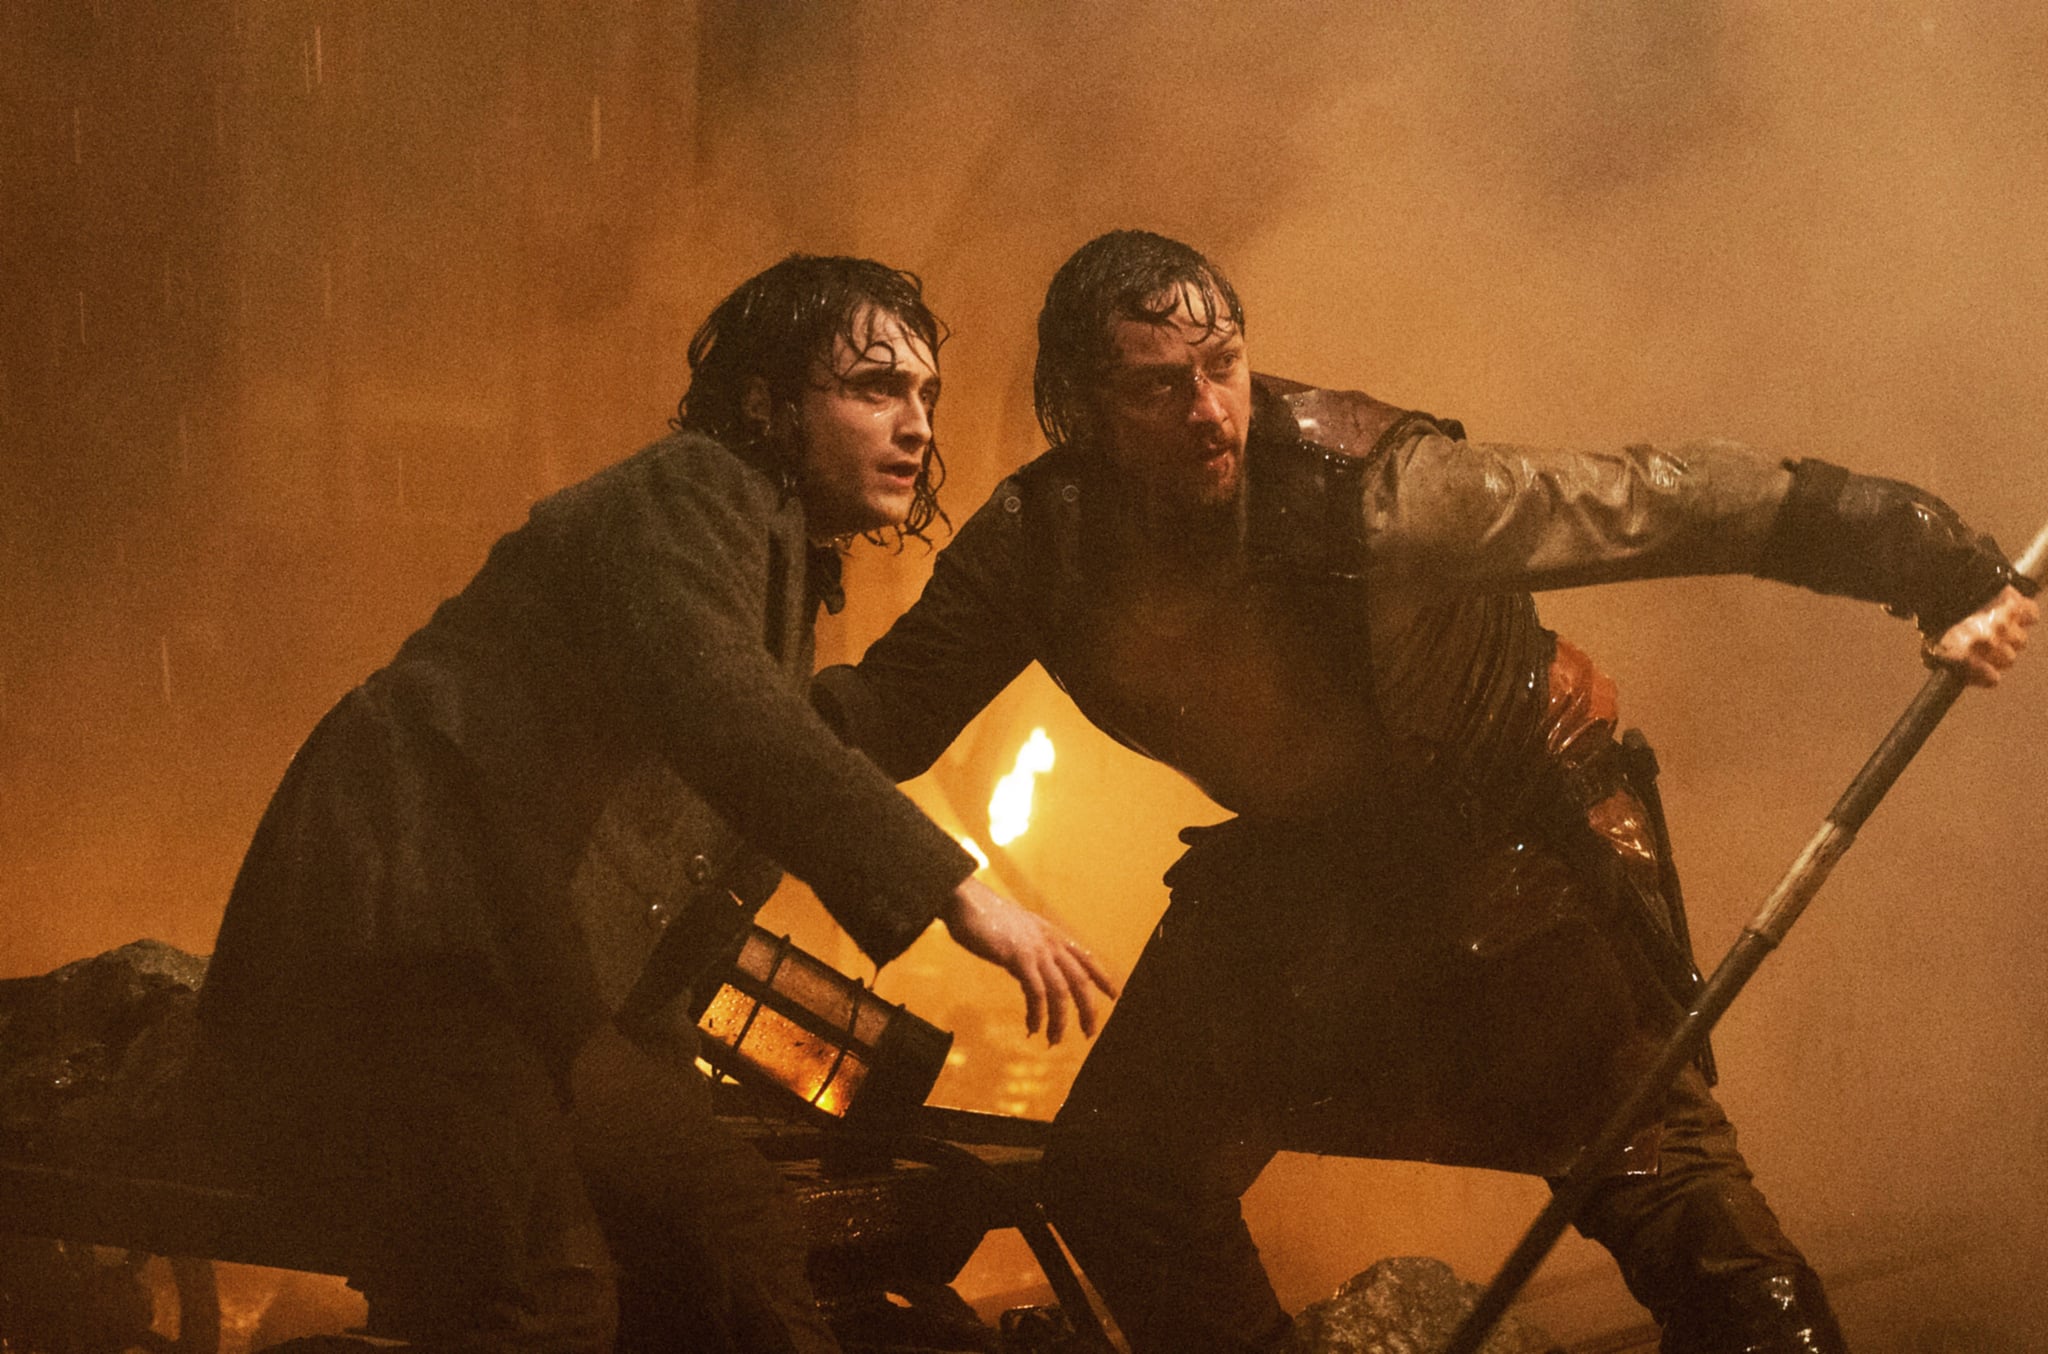 VICTOR FRANKENSTEIN, from left: Daniel Radcliffe as Igor, James McAvoy as Victor Frankenstein, 2015. ph: Alex Bailey / TM & copyright  20th Century Fox Film Corp. All rights reserved / courtesy Everett Collection